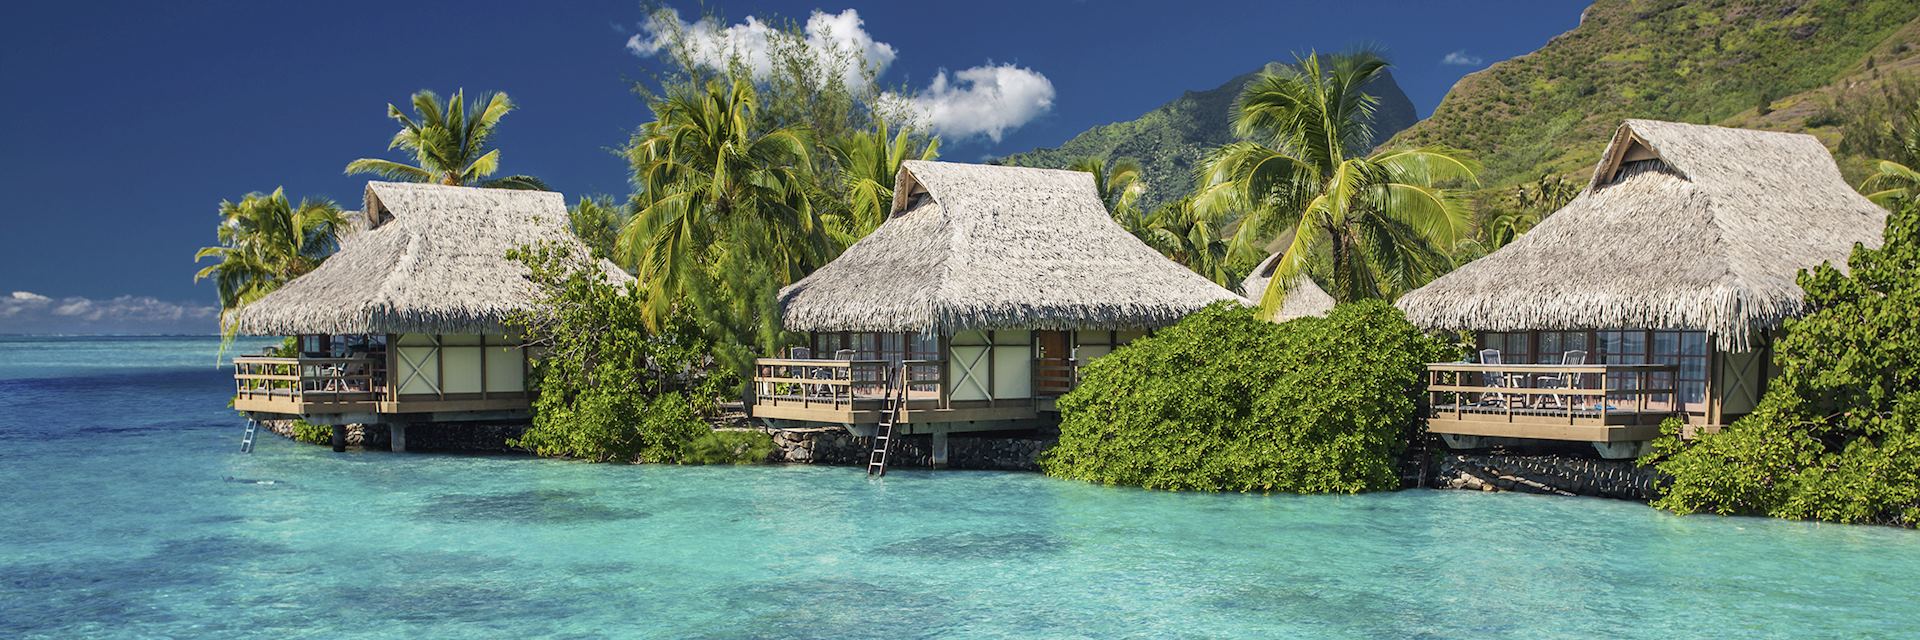 A resort on the island of Moorea